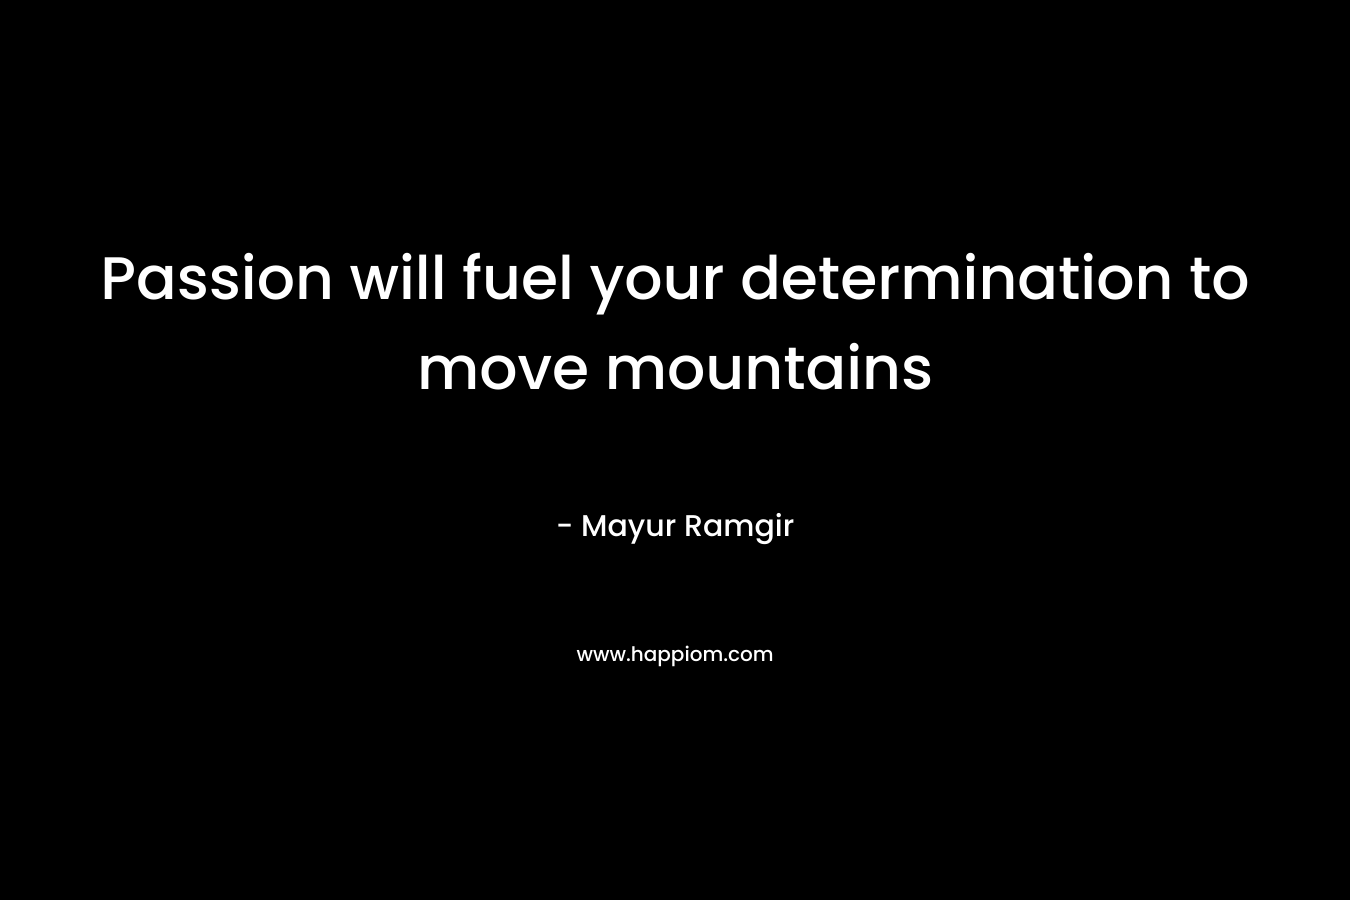 Passion will fuel your determination to move mountains